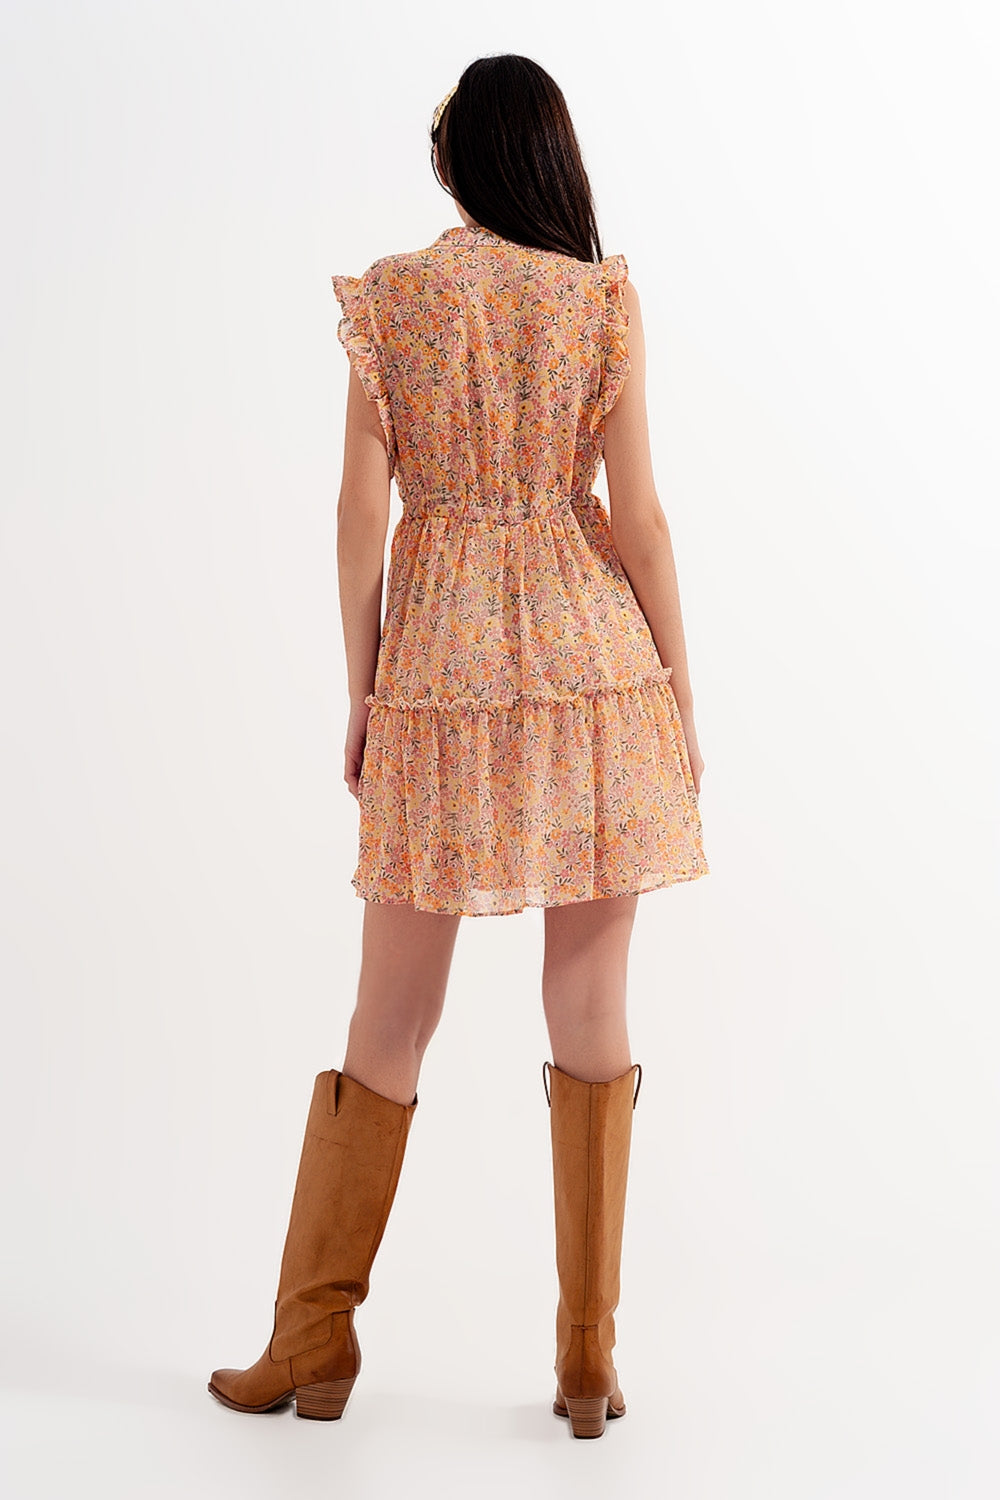 Mini dress with ruffle trims in vintage floral in coral Szua Store